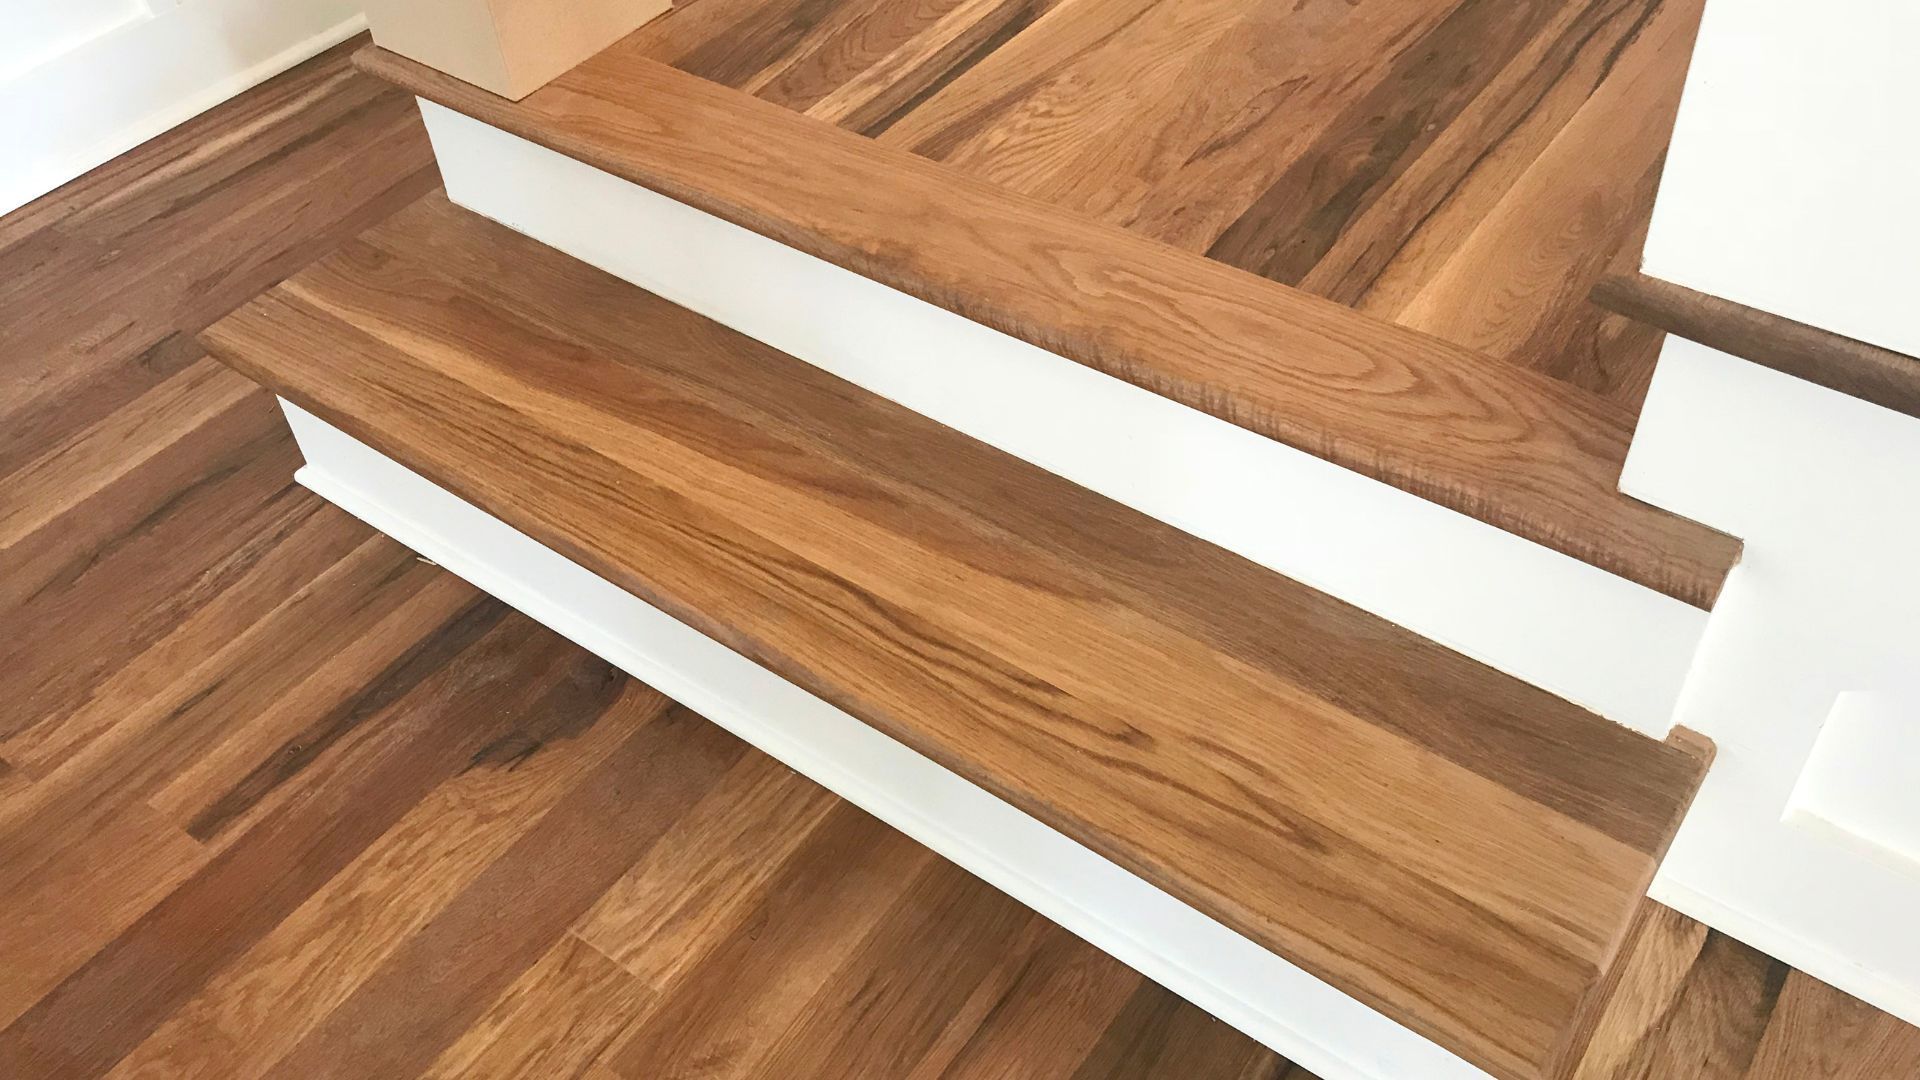 Warm-toned hardwood stairs with white risers matching the floor in Athens, GA.